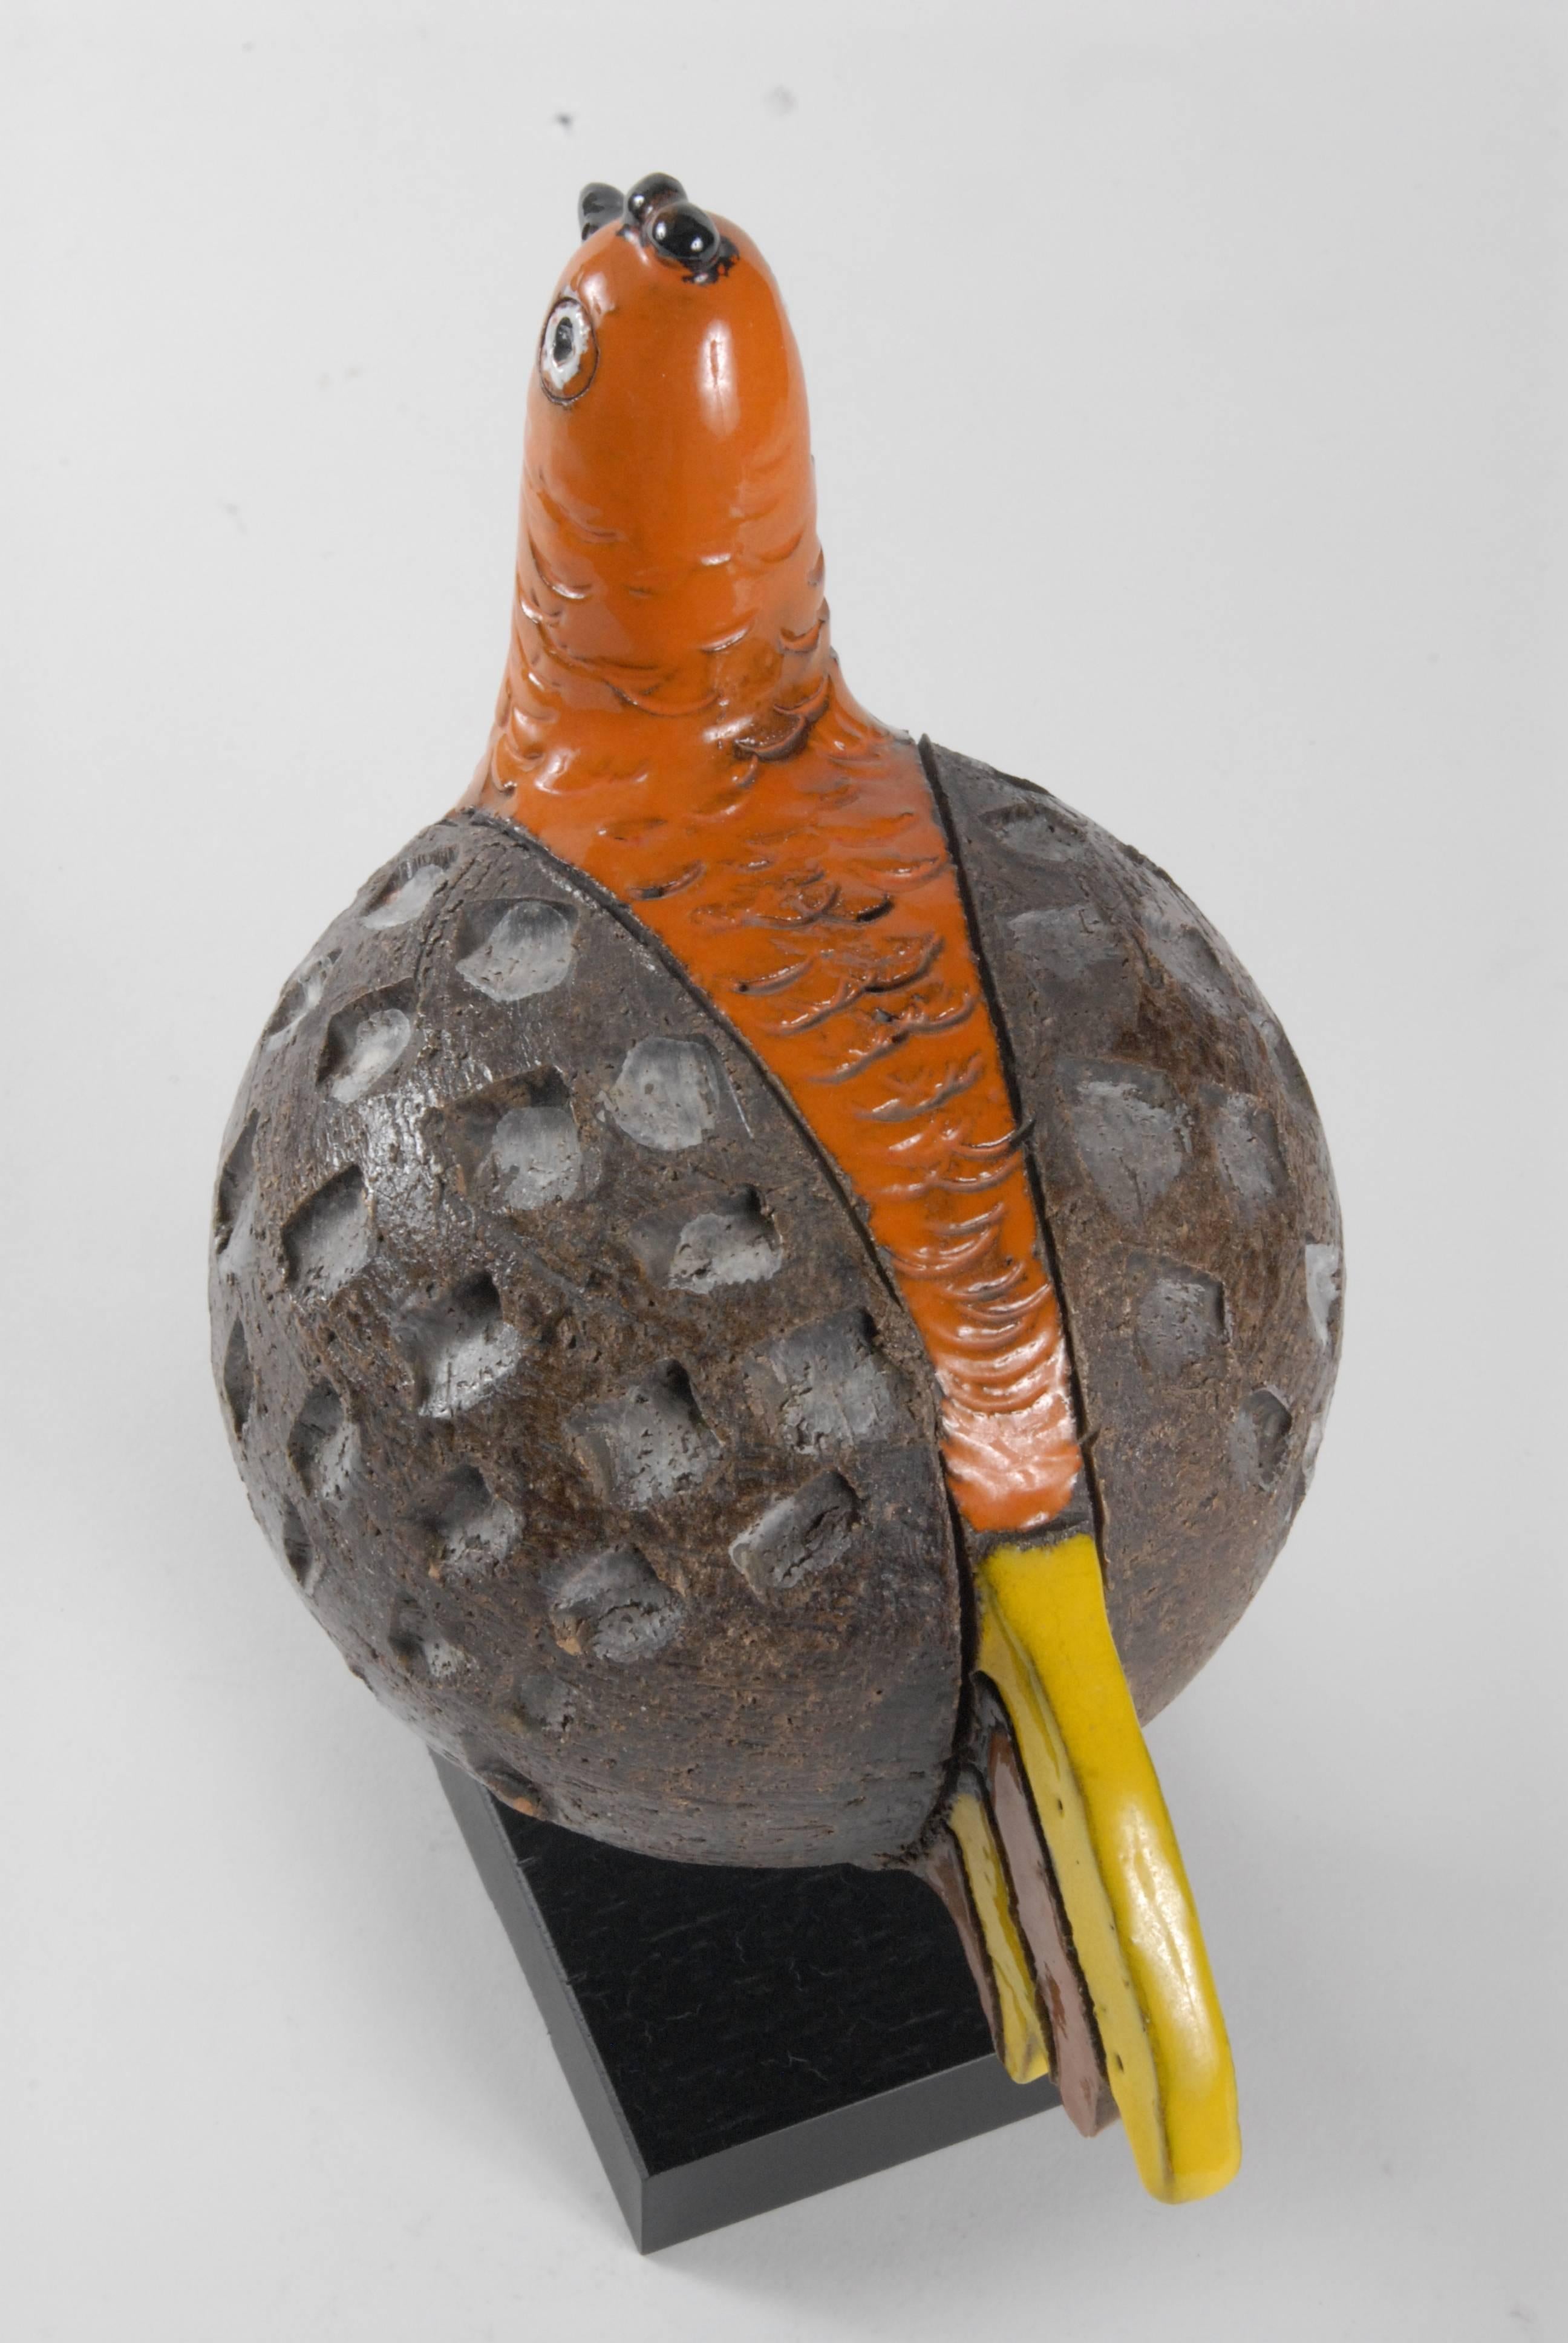 An Aldo Londi designed rare example bird, with impressed and Sgraffito patterns and orange, brown and yellow glazes on a wooden base.